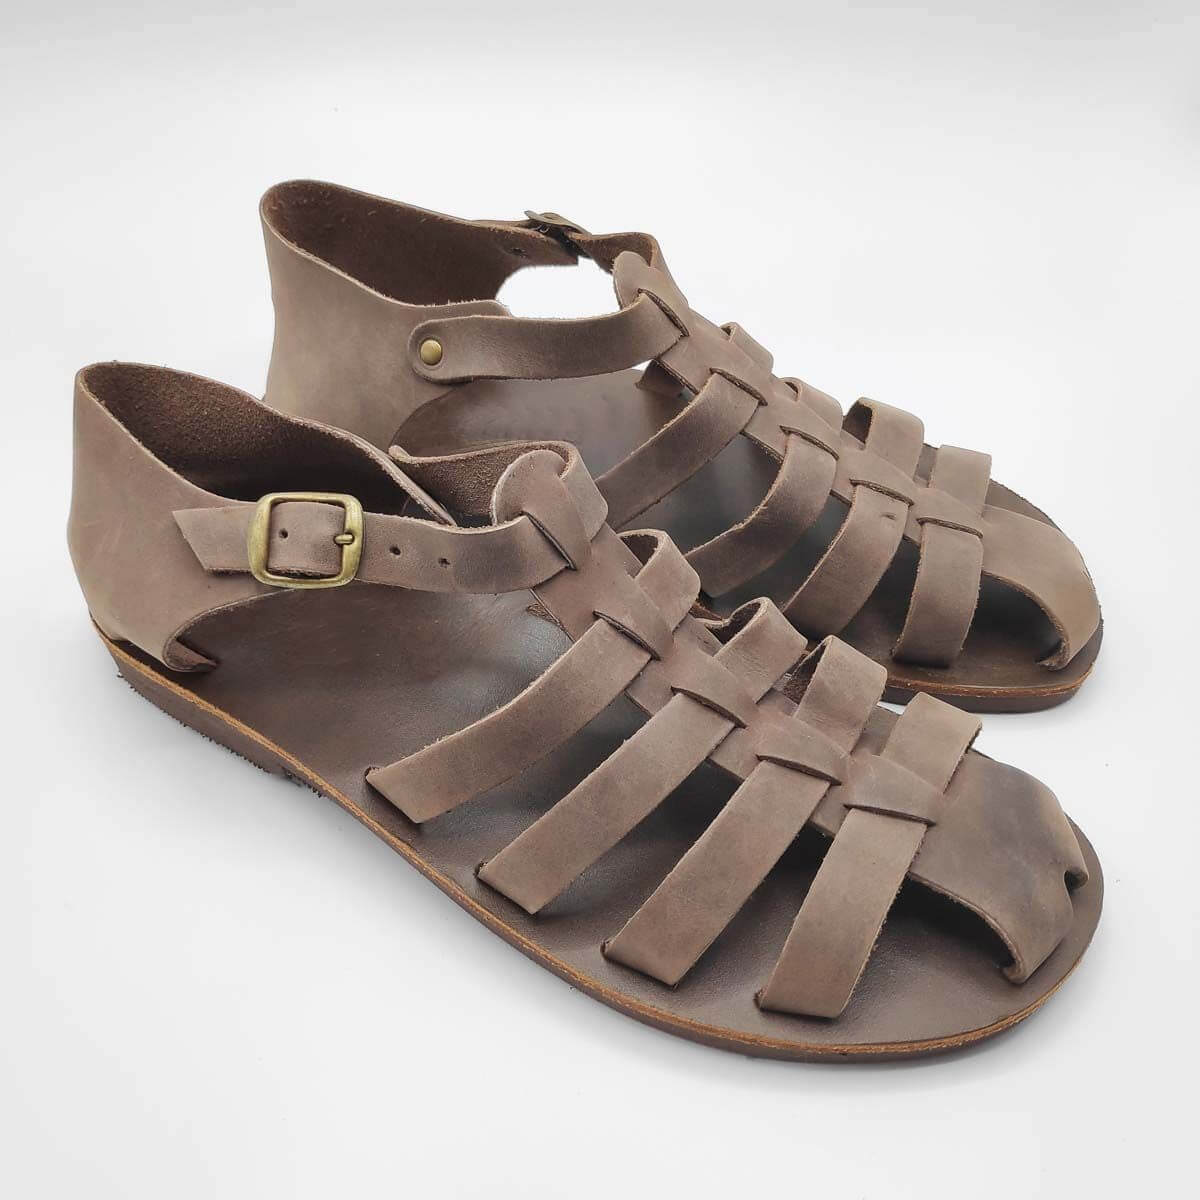 Mens Closed Toe Sandals - Leather Sandals by Pagonis Greek Sandals